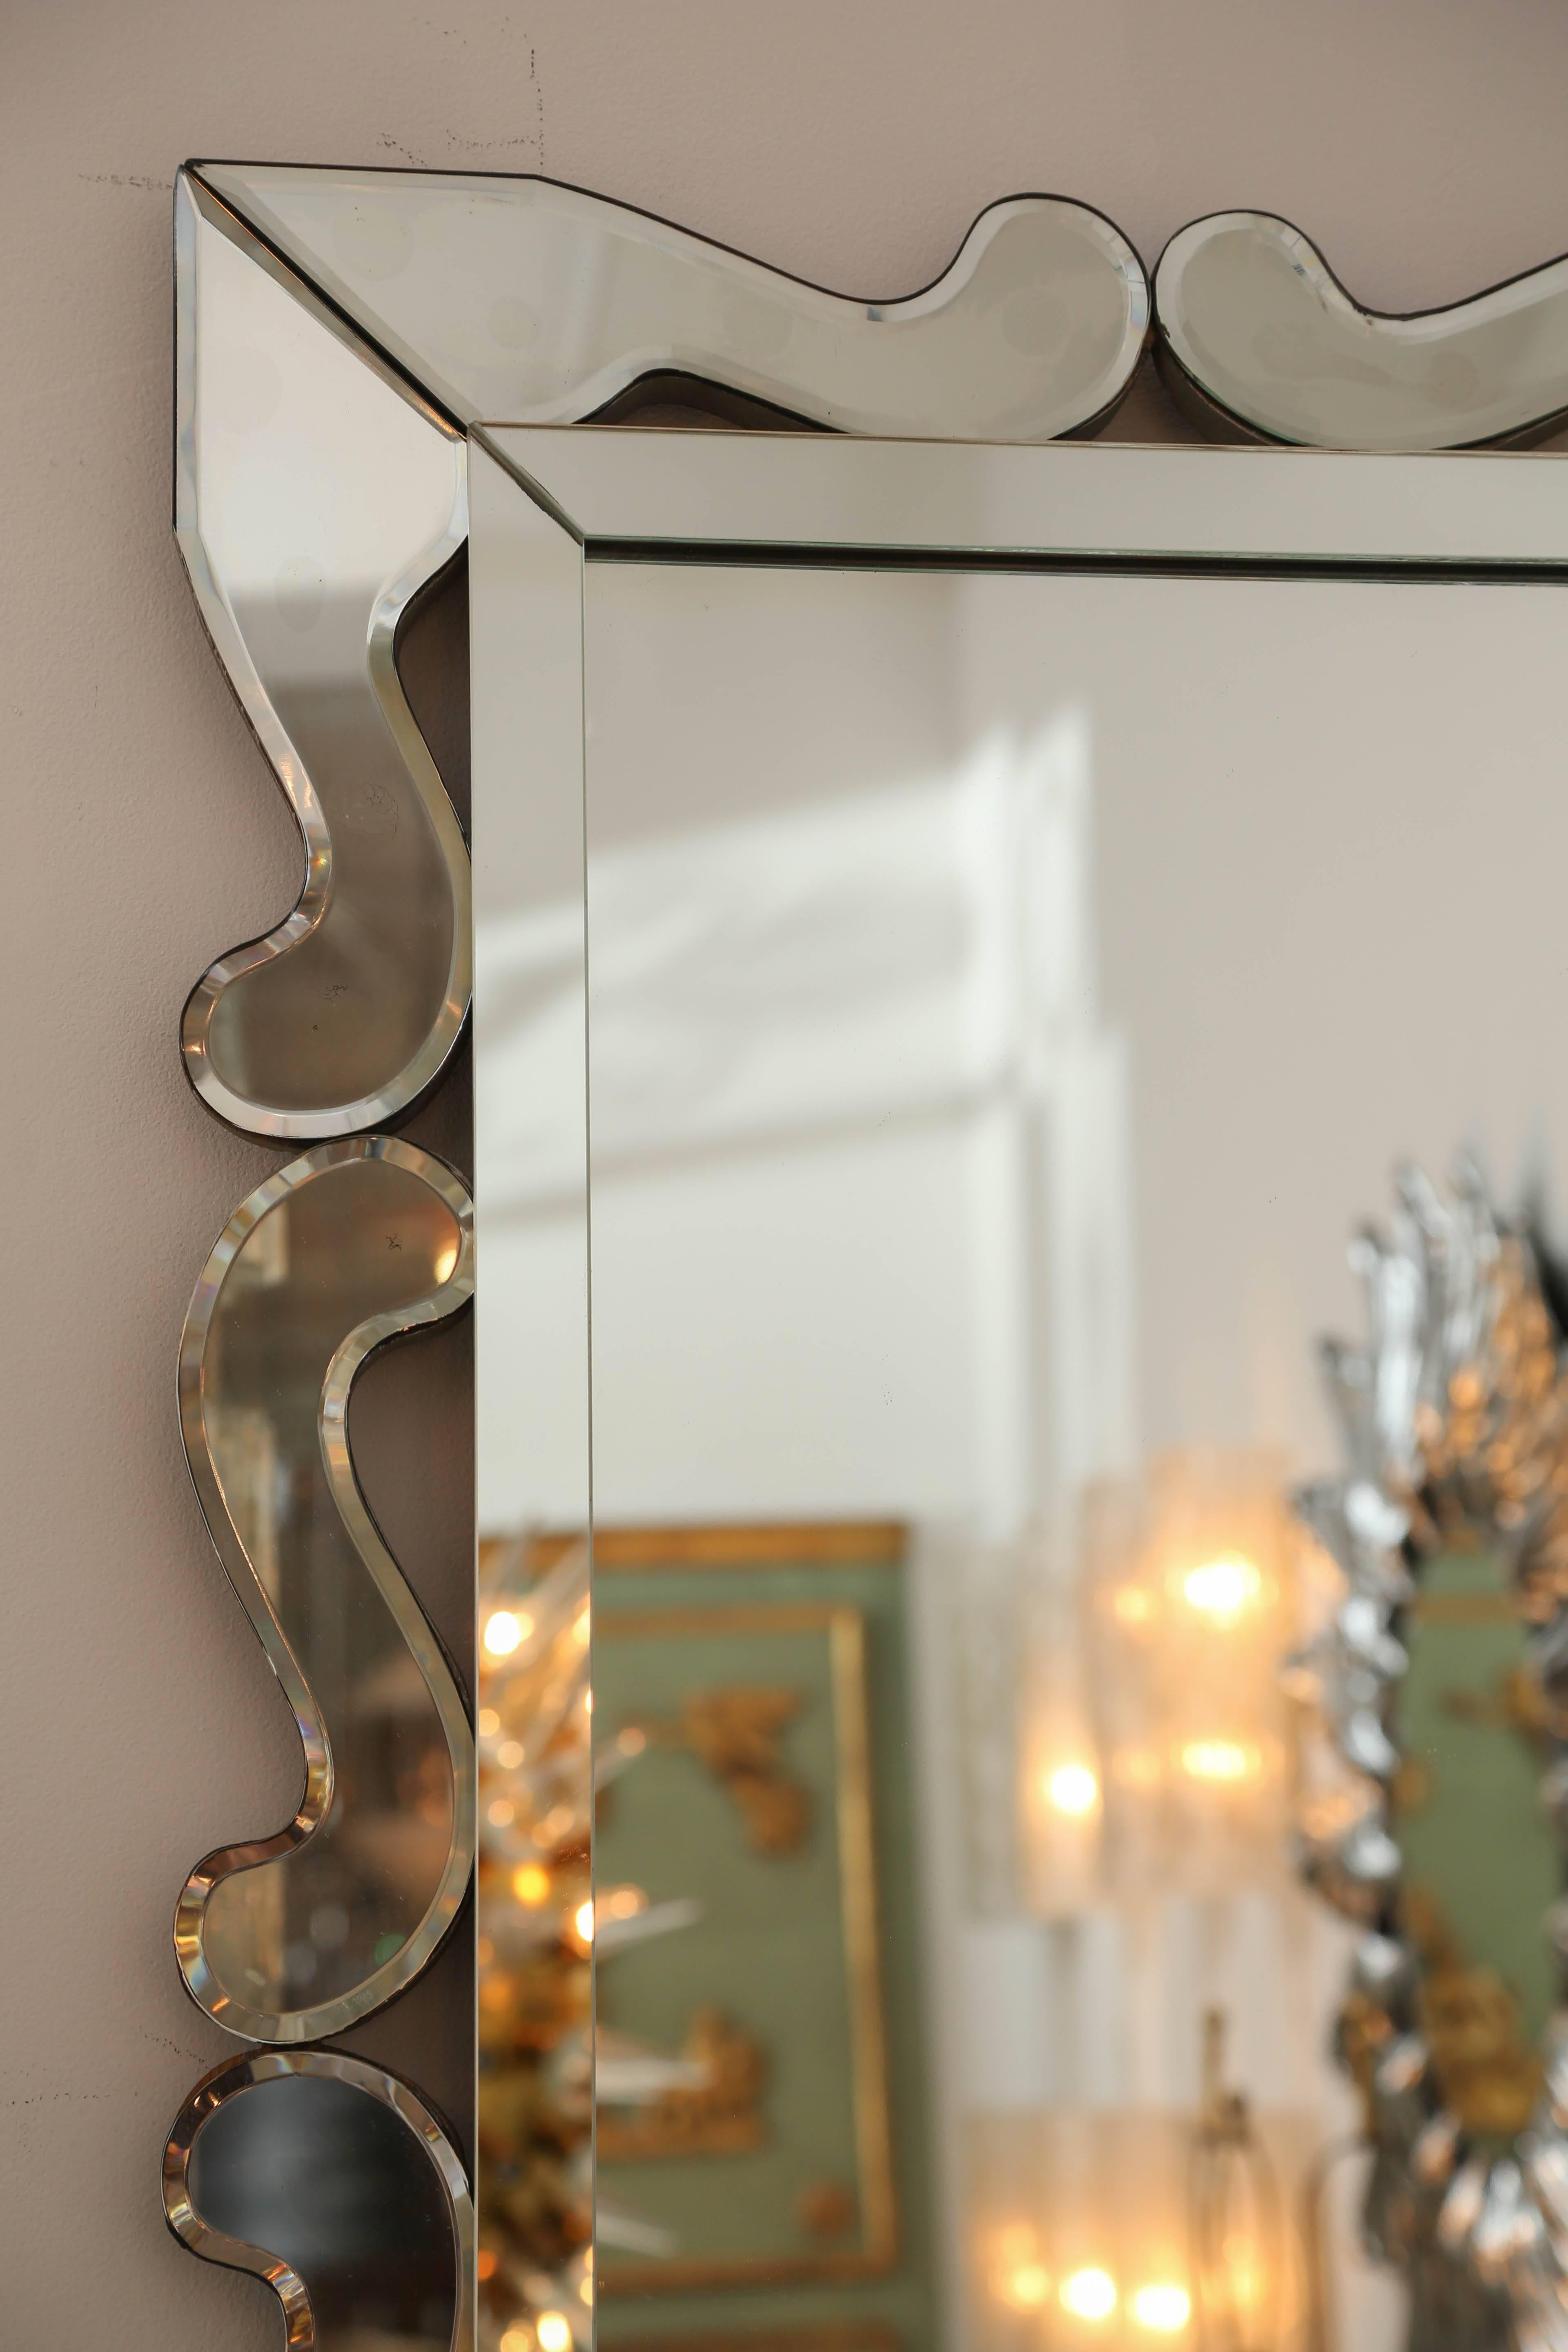 Art Deco Scalloped Mirrored Mirror In Good Condition For Sale In West Palm Beach, FL